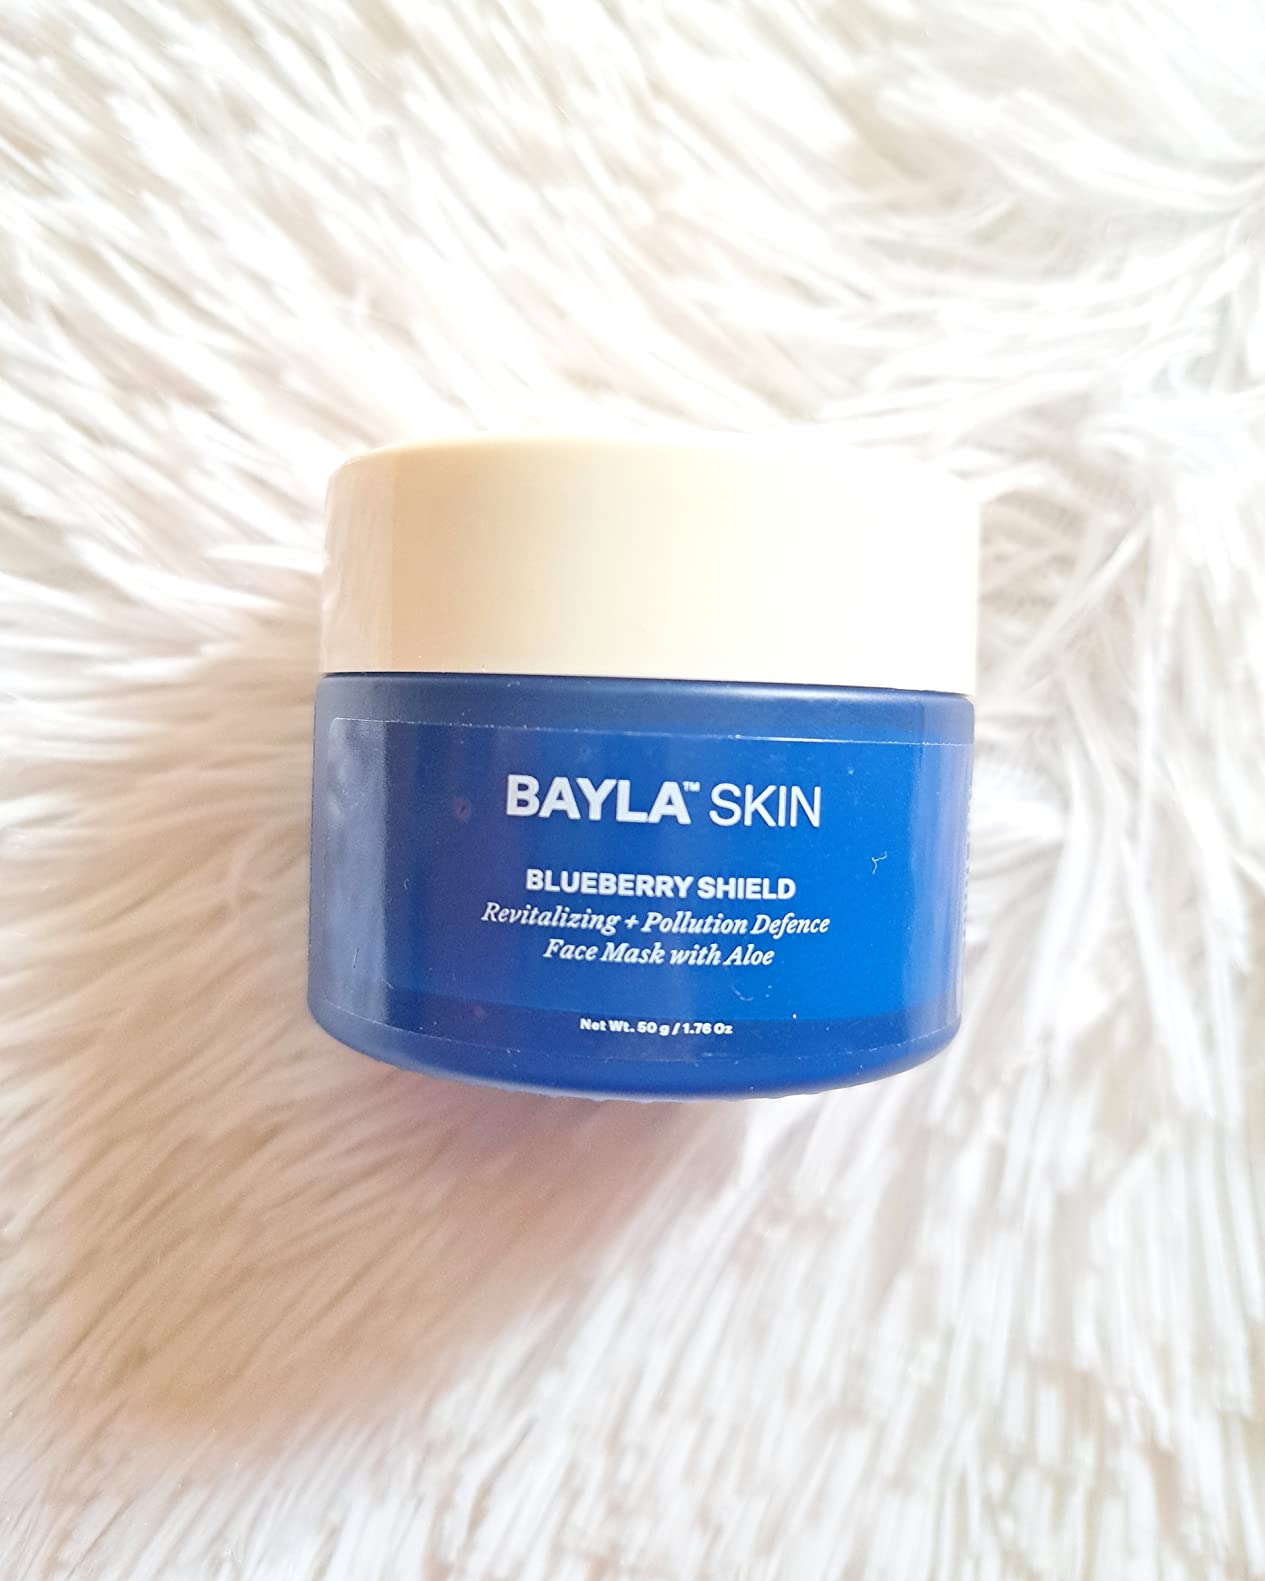 Bayla's Blueberry Shield Revitalizing + Pollution Defense Face Mask Review with Ingredient Analysis